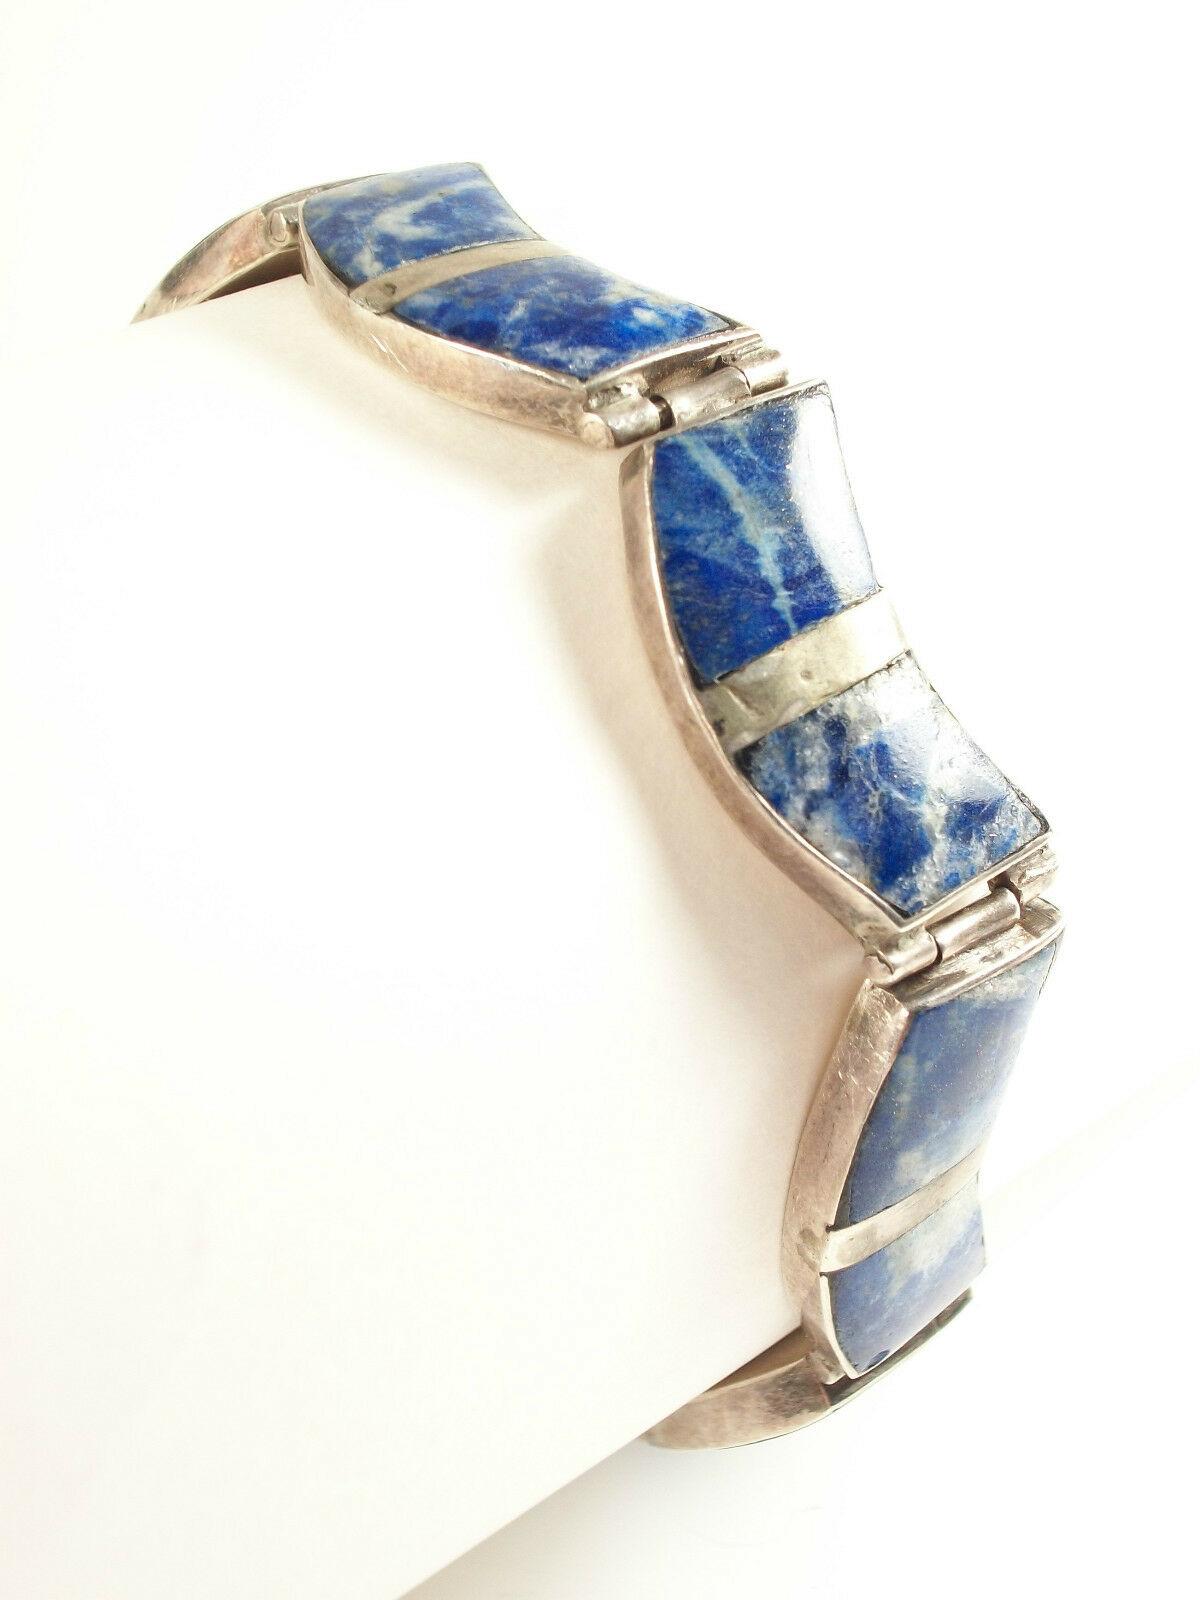 Vintage - extraordinary quality and design silver bracelet - set with panels of lapis lazuli - scalloped/hinged links with safety catch and closure - stamped on the back - PLATA 980 (between sterling silver and fine silver) - Mexico - mid 20th